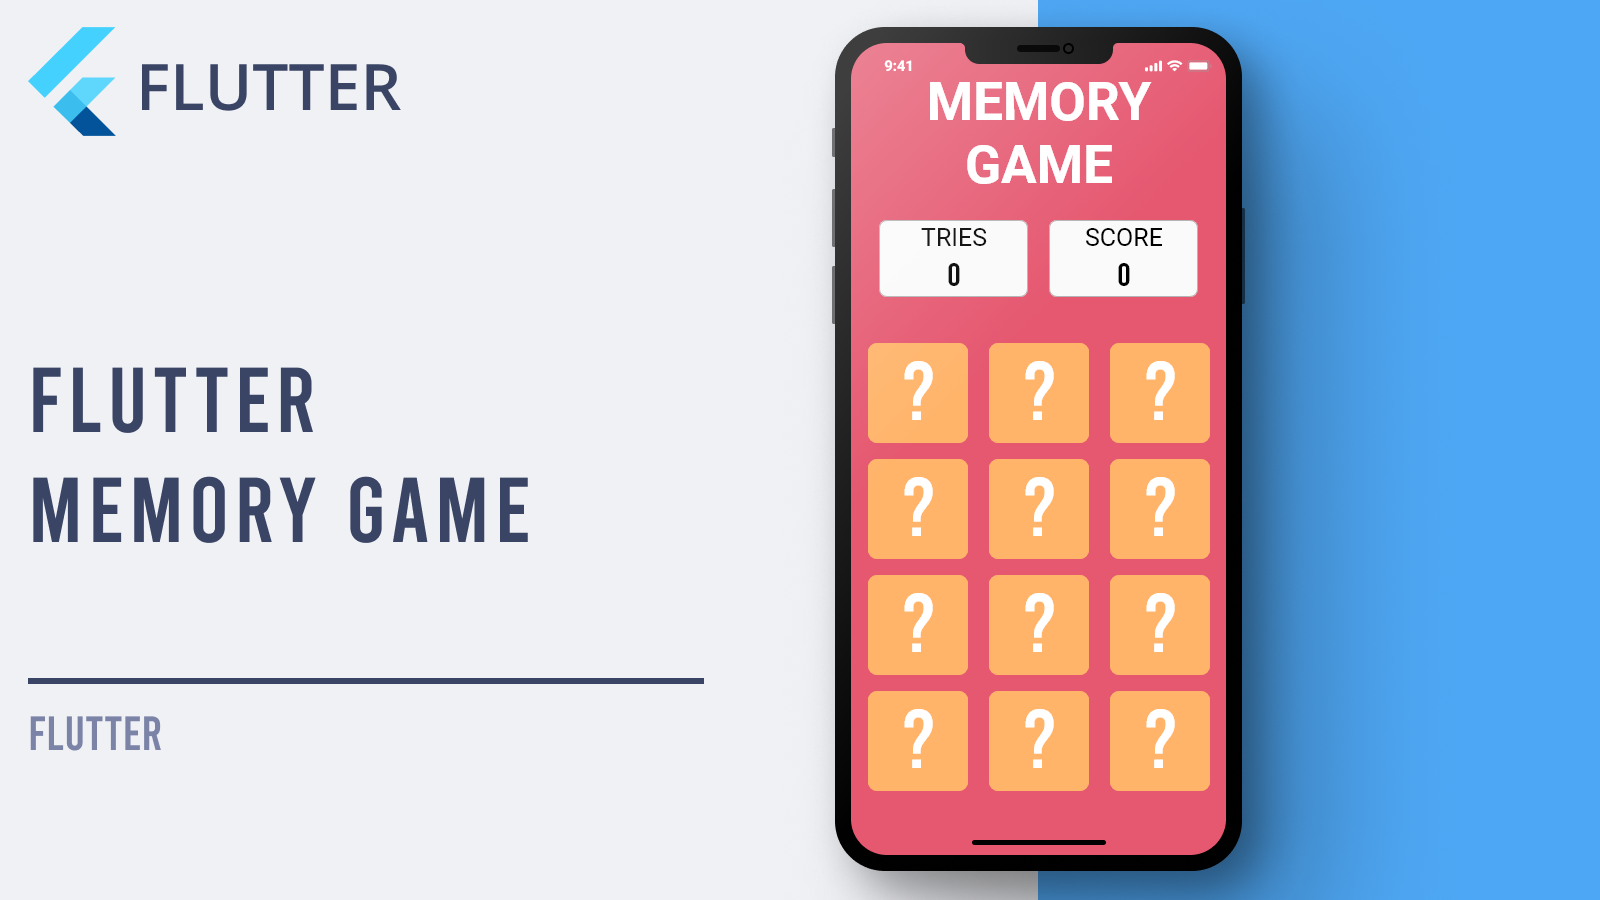 A simple card memory game with Flutter